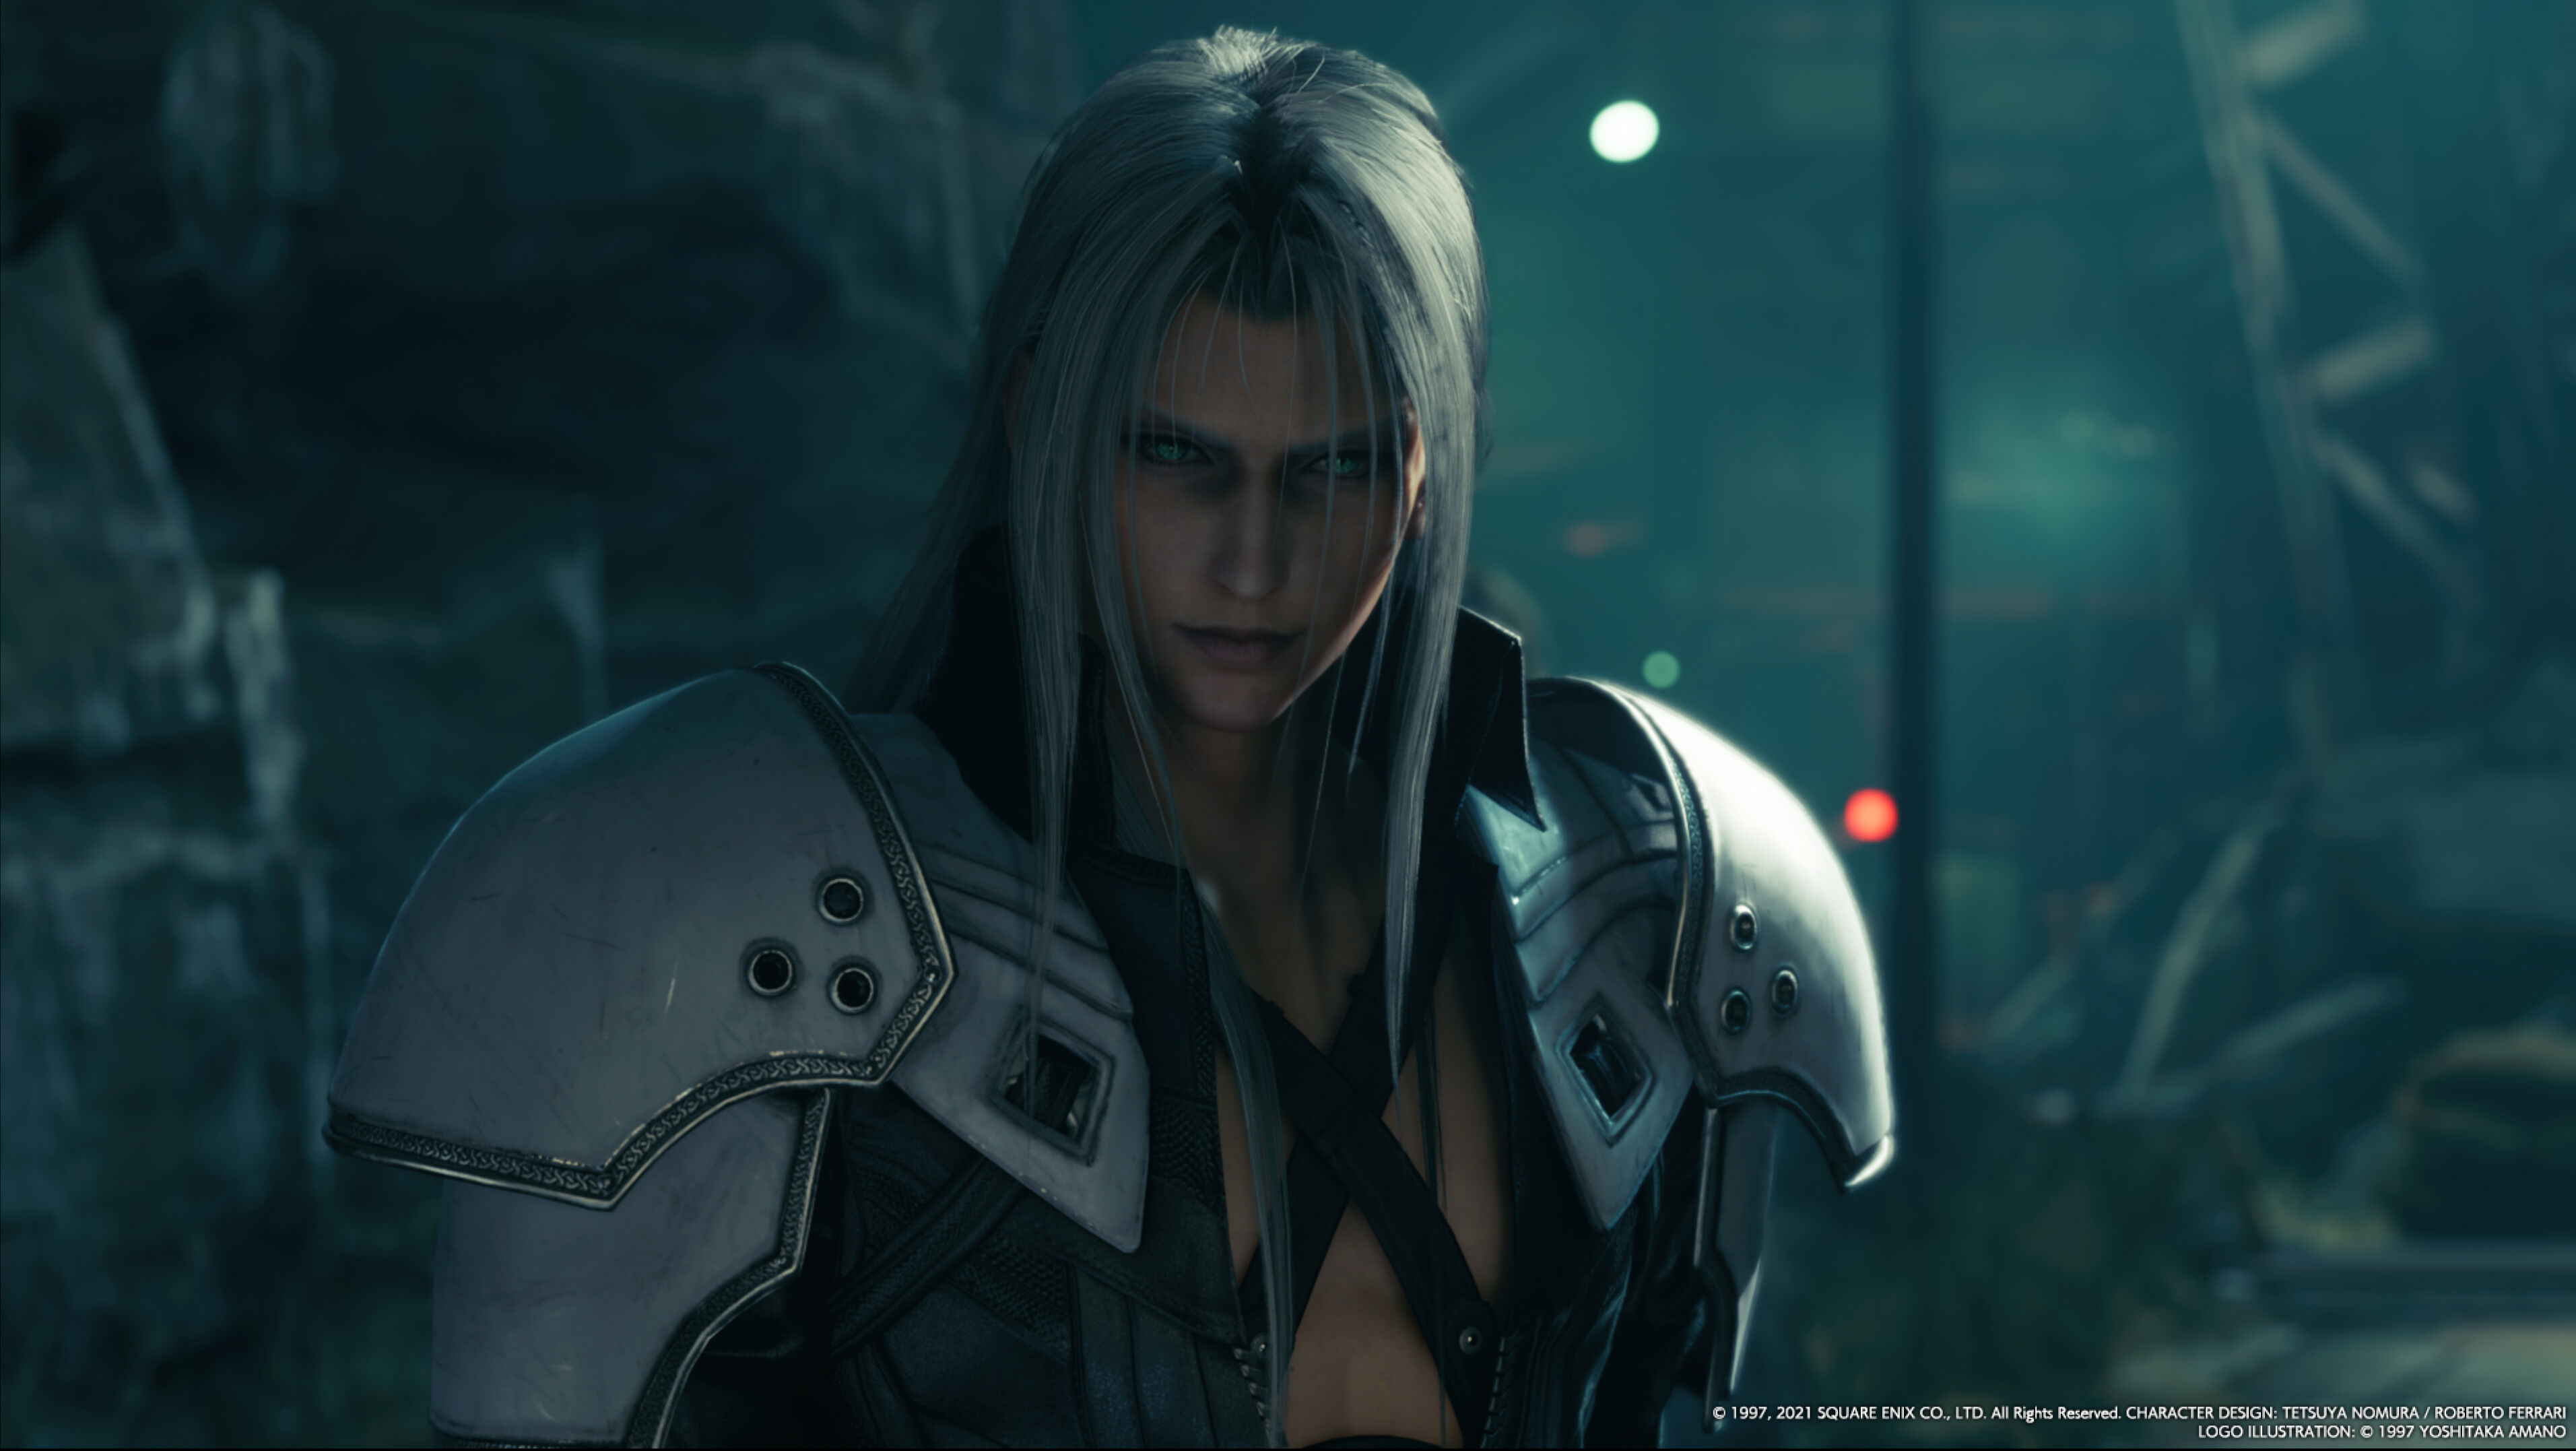 Final Fantasy 7 Remake Part 3's story already has a first draft